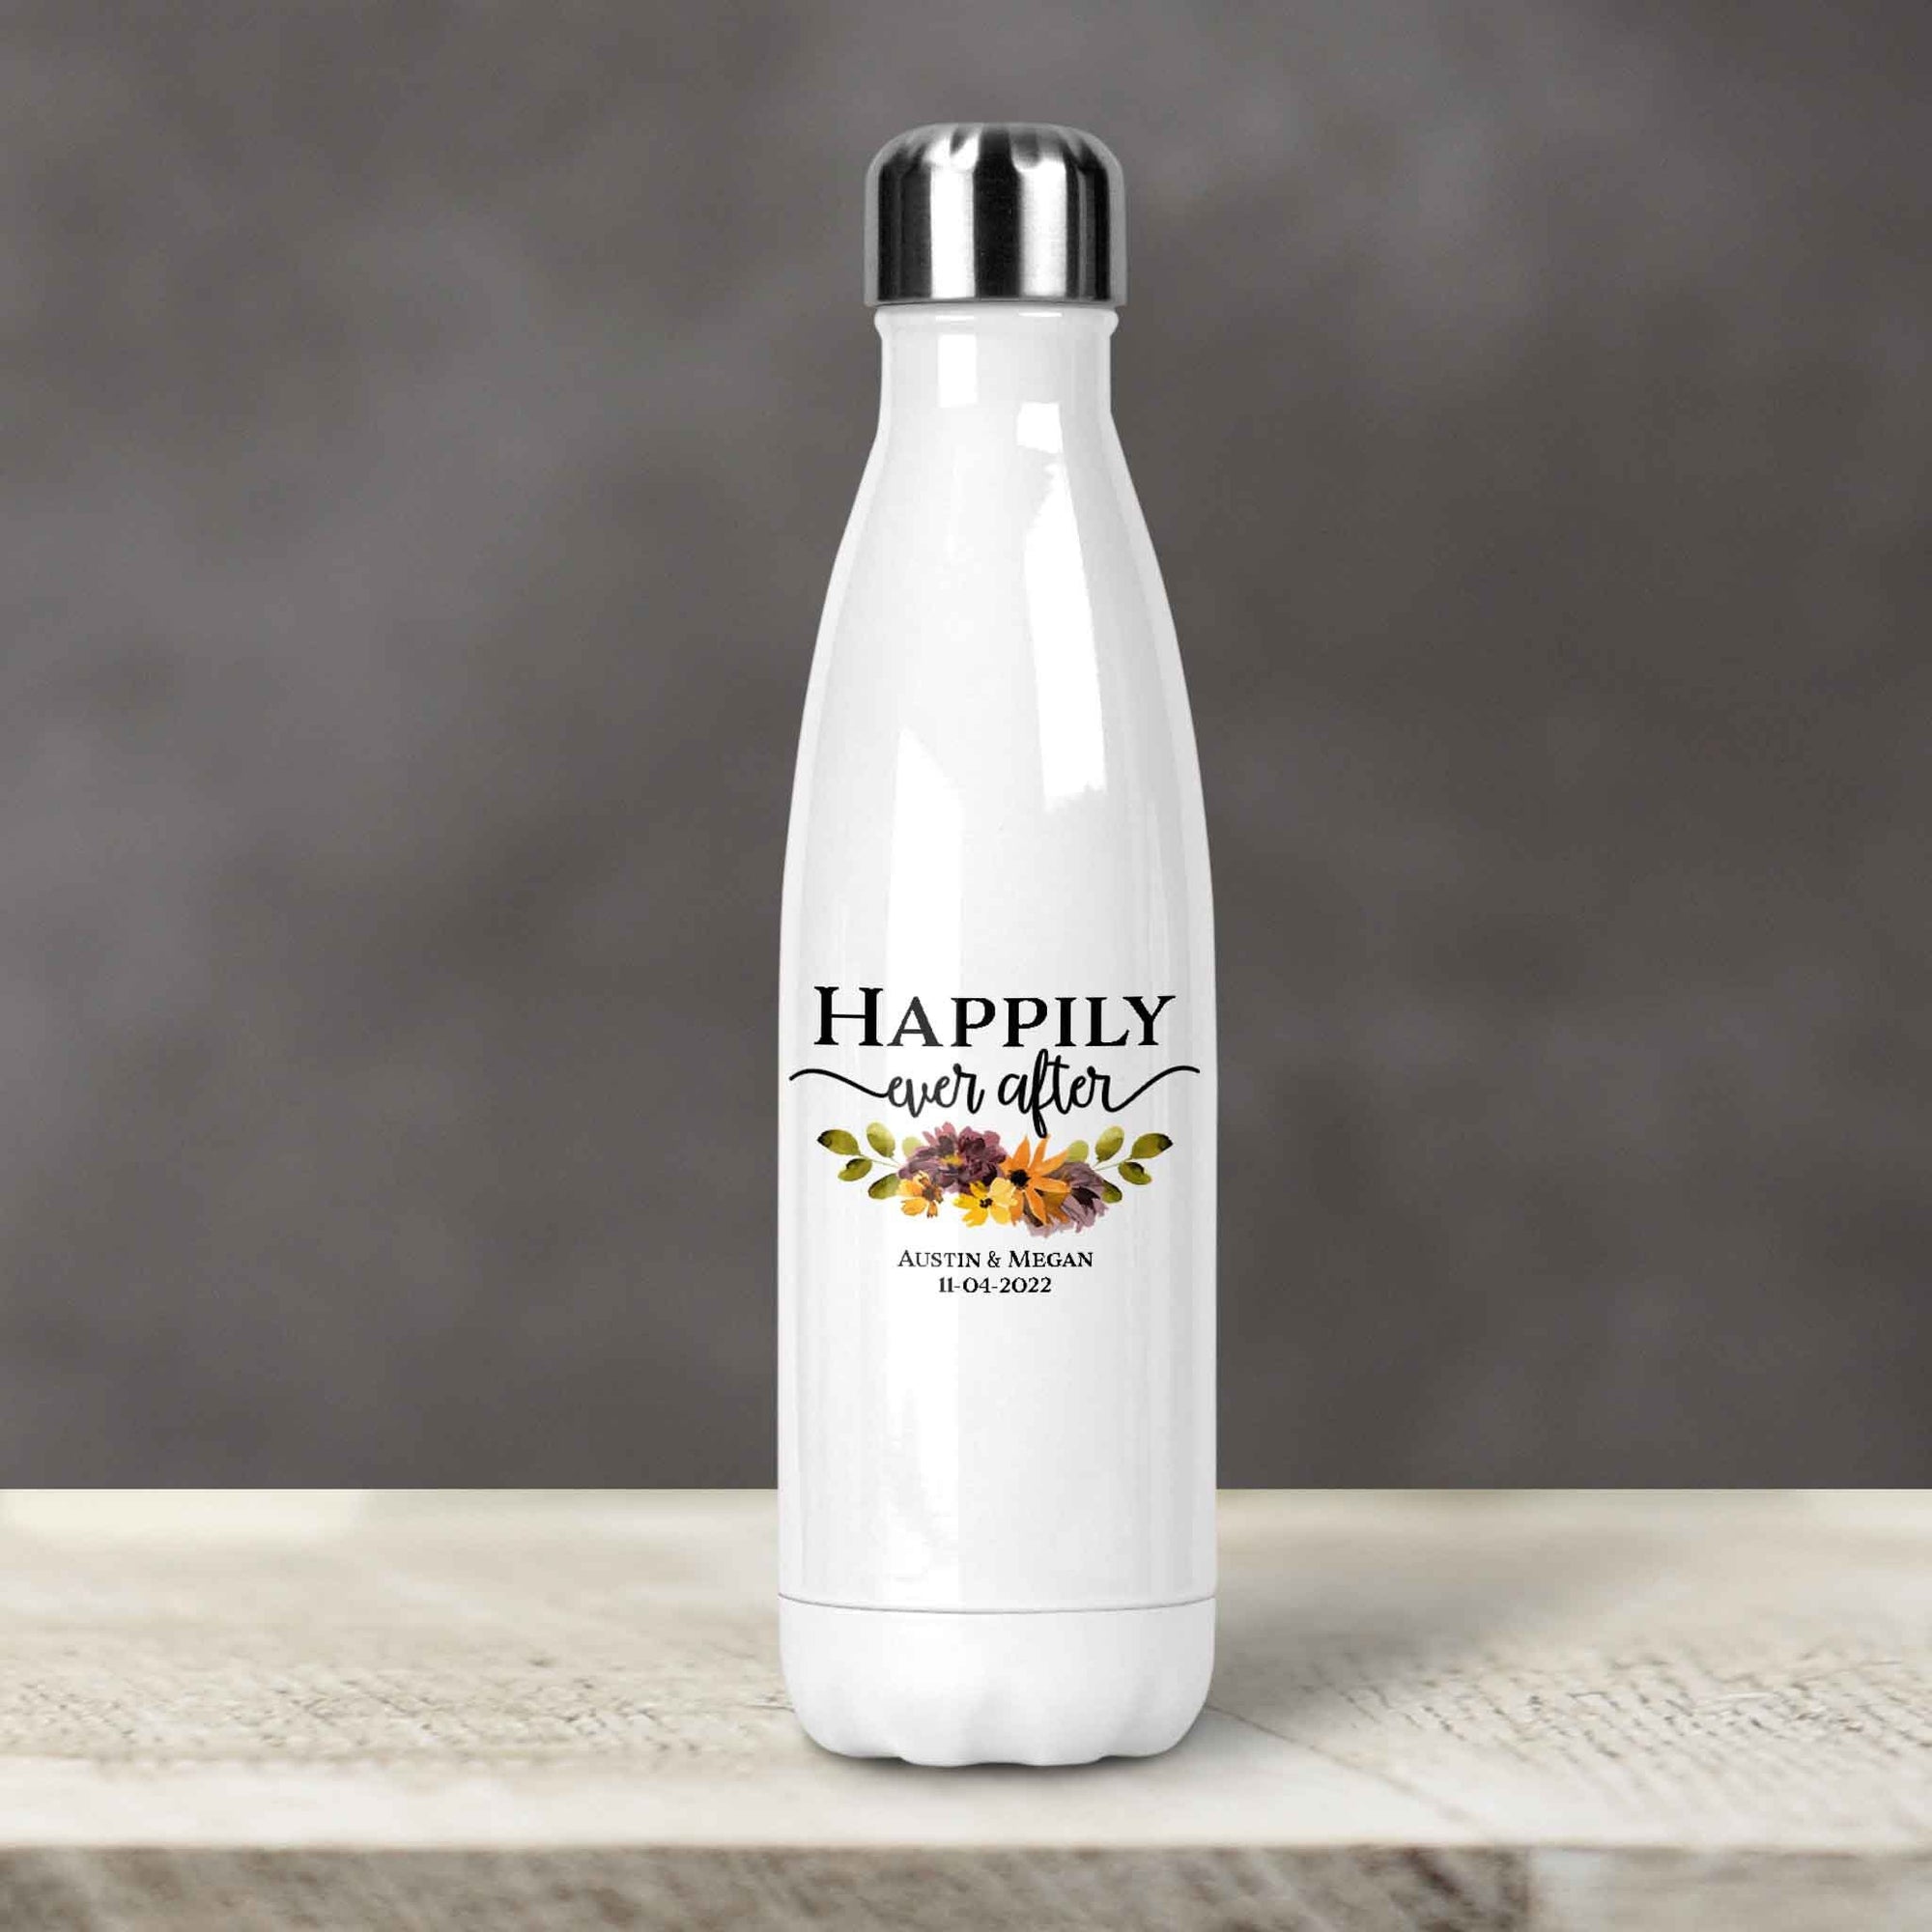 Personalized Water Bottles | Custom Stainless Steel Water Bottles | 17 oz Soda | Happily Ever After Fall Floral